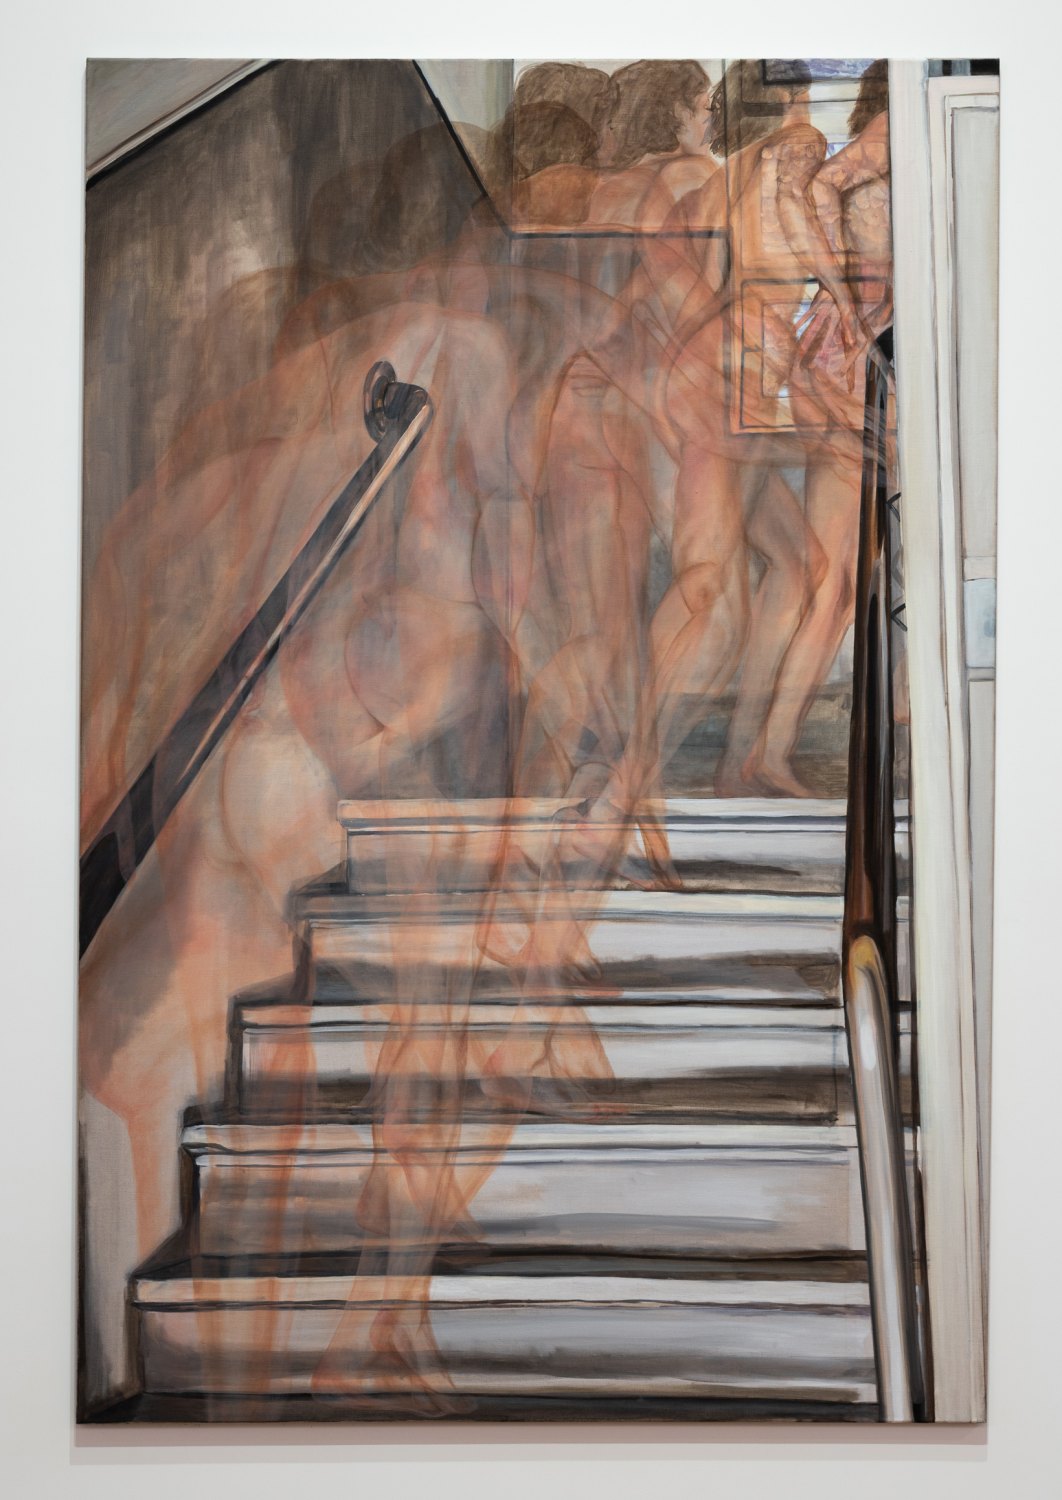 Jana Euler Nude Climbing Up the Stairs, 2014 Oil on canvas, 180 x 120 cm